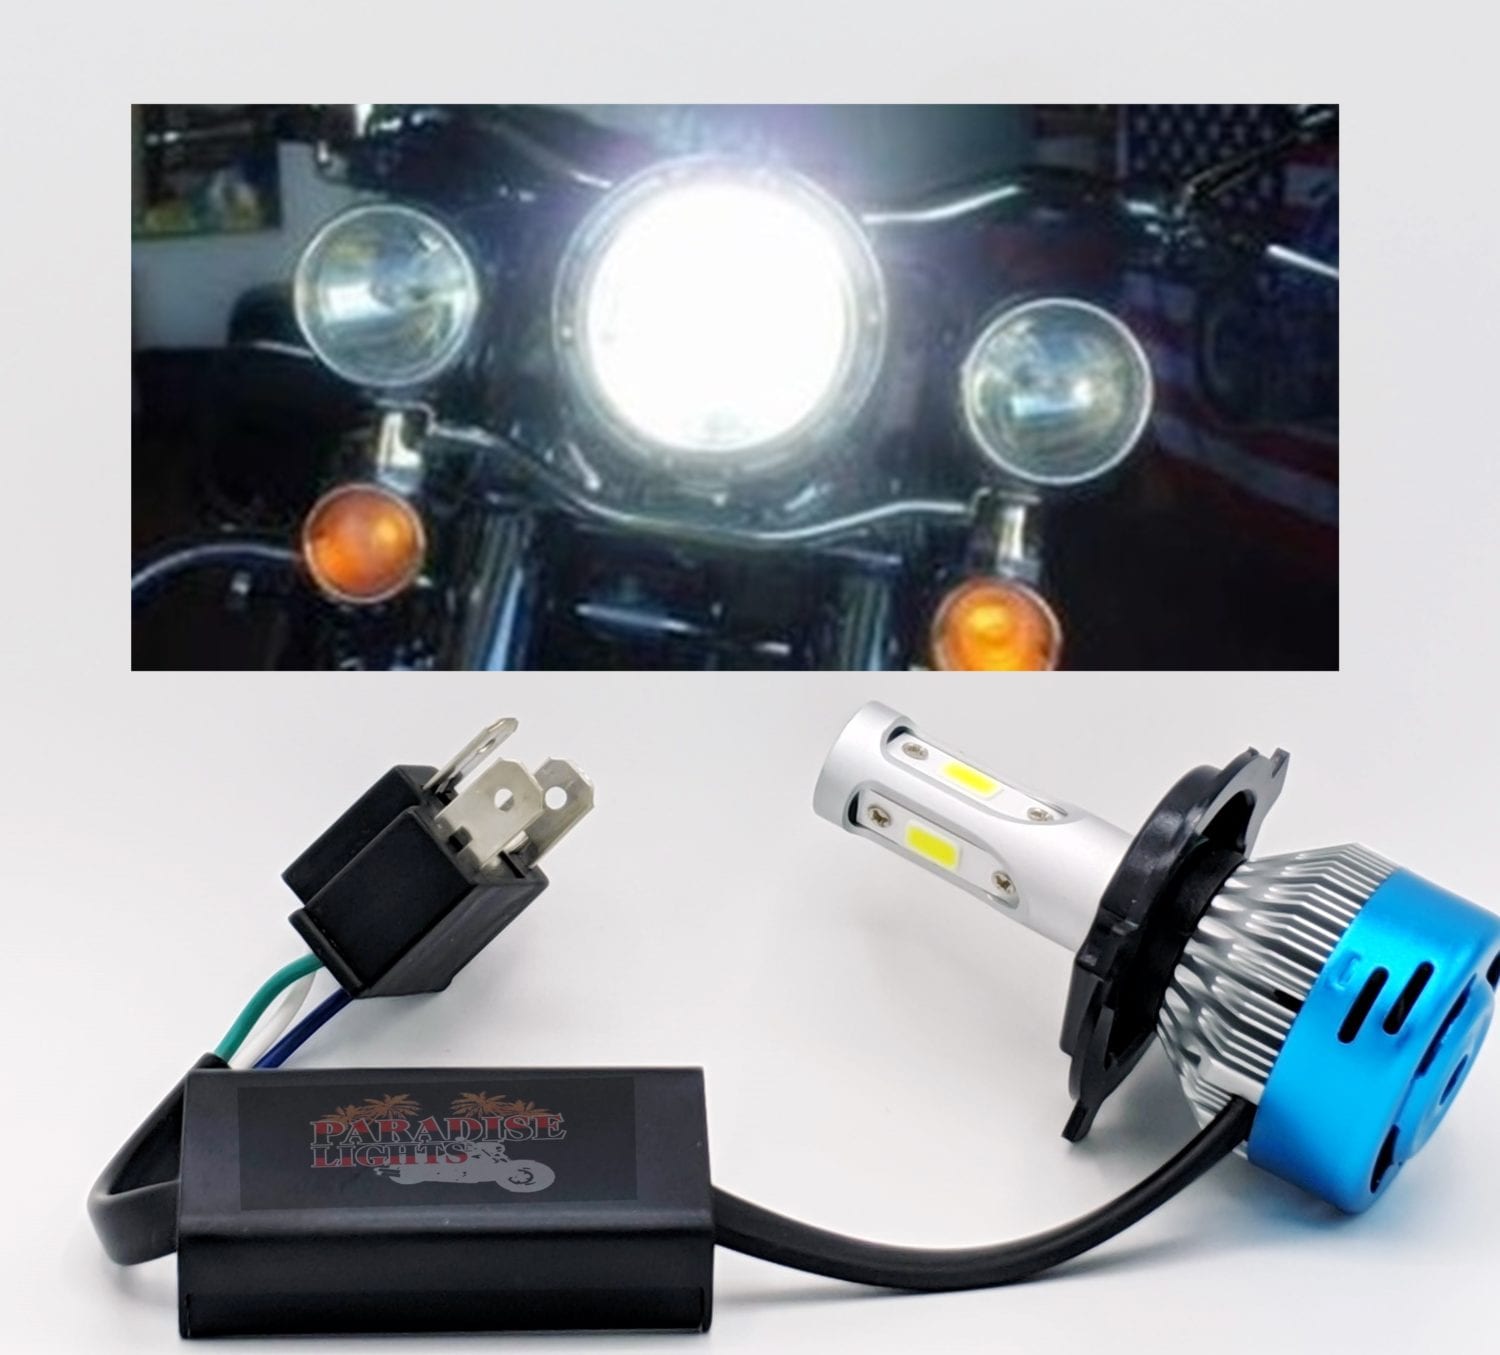 Super powerful 10,000 lumen LED lamps for car and motorcycle headlights  BEVINSEE Z25 H4. car lights 